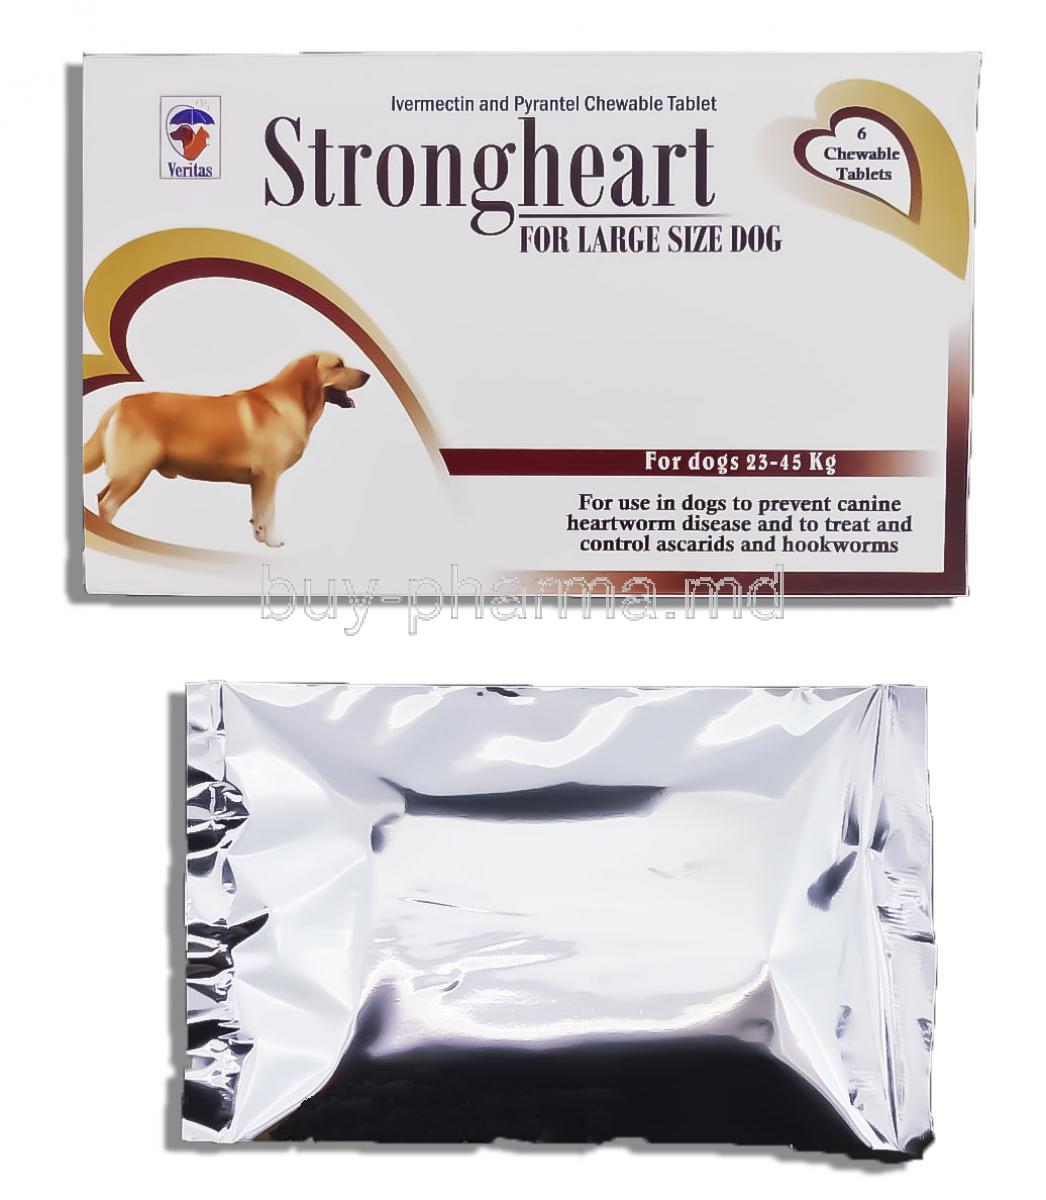 Strongheart Chewable for large dog